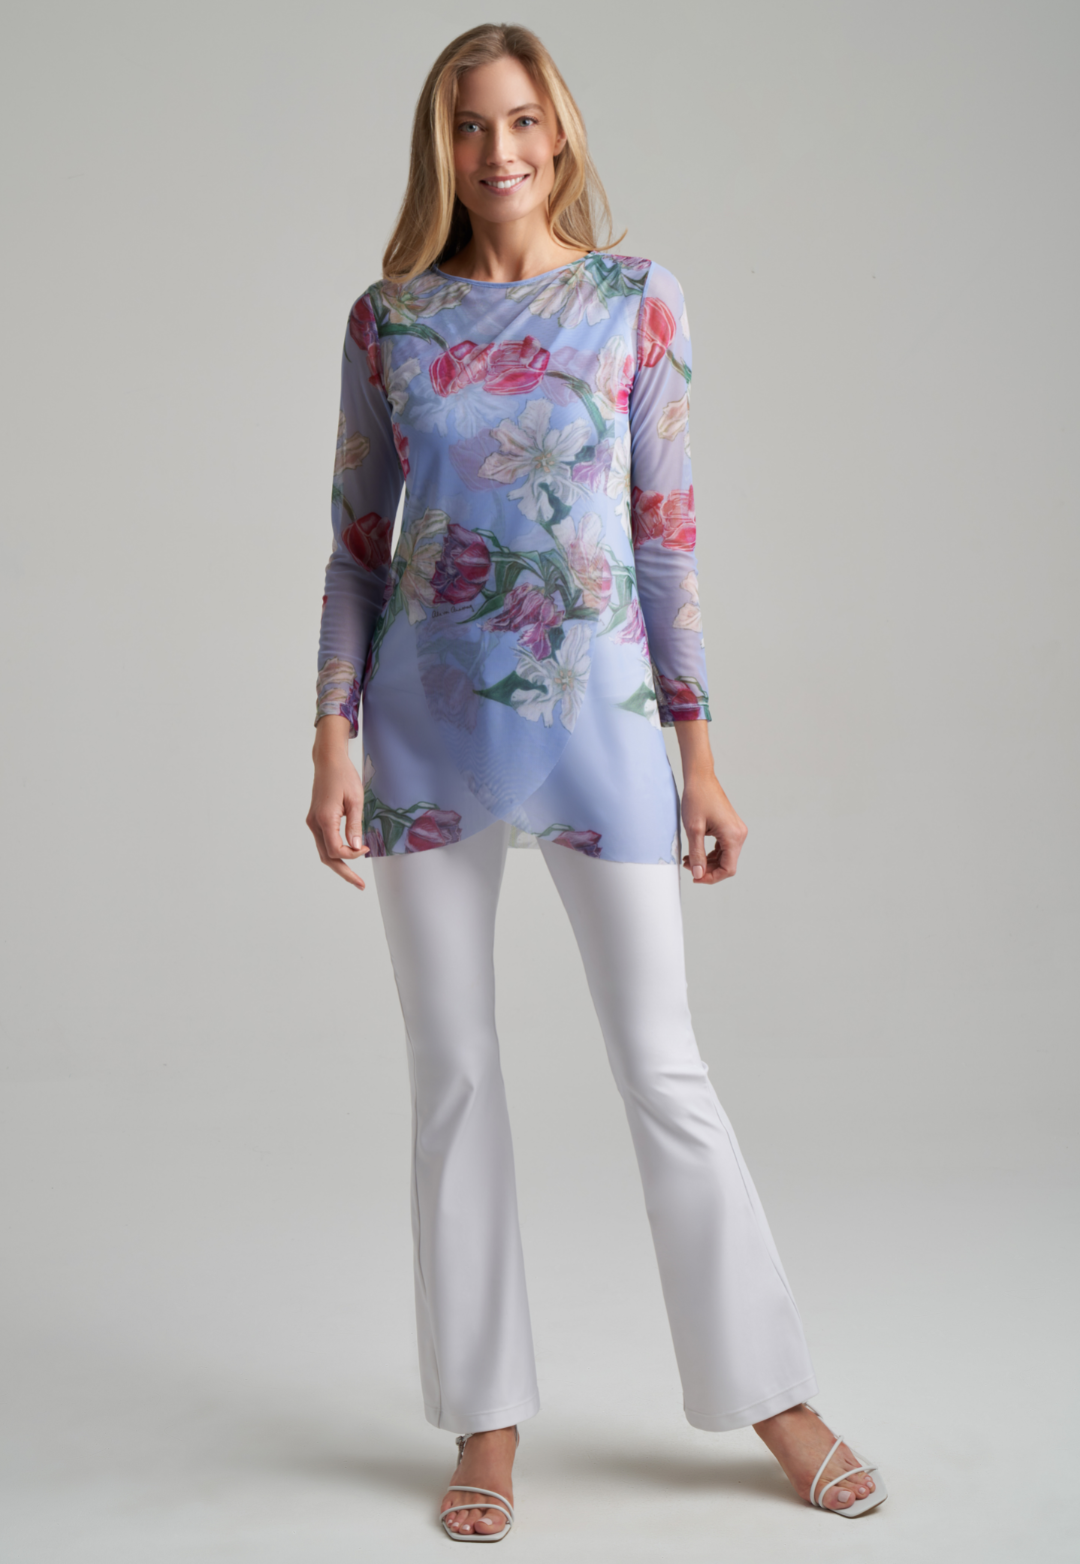 Woman wearing tulip printed mesh tunic with stretch knit white pants and tank top in white by Ala von Auersperg for spring summer 2021